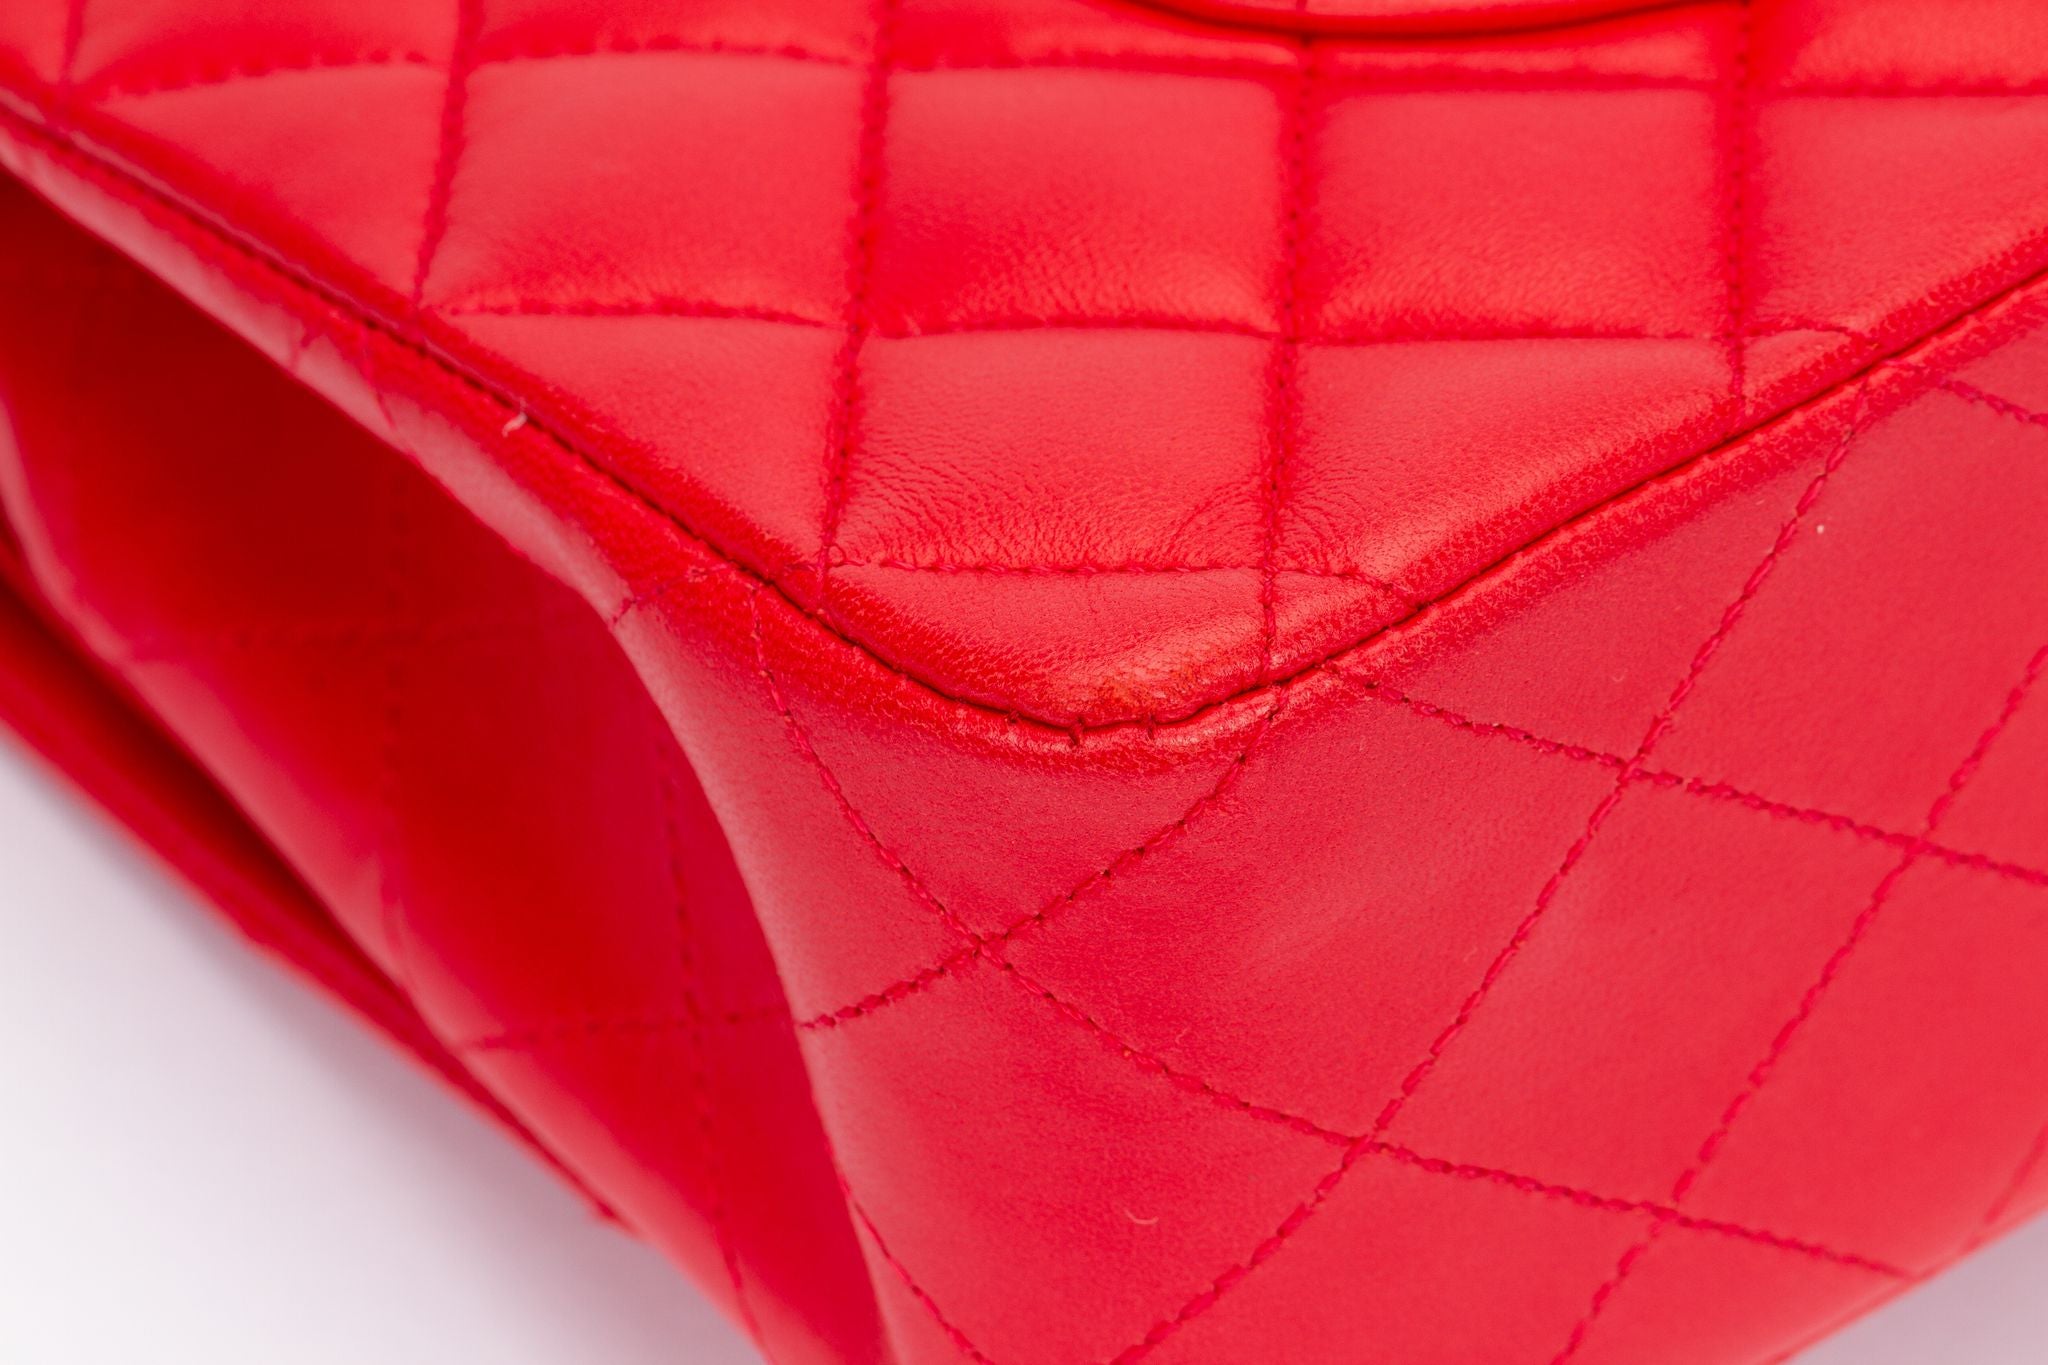 Chanel Bright Red 10 Double Flap Bag - Vintage Lux